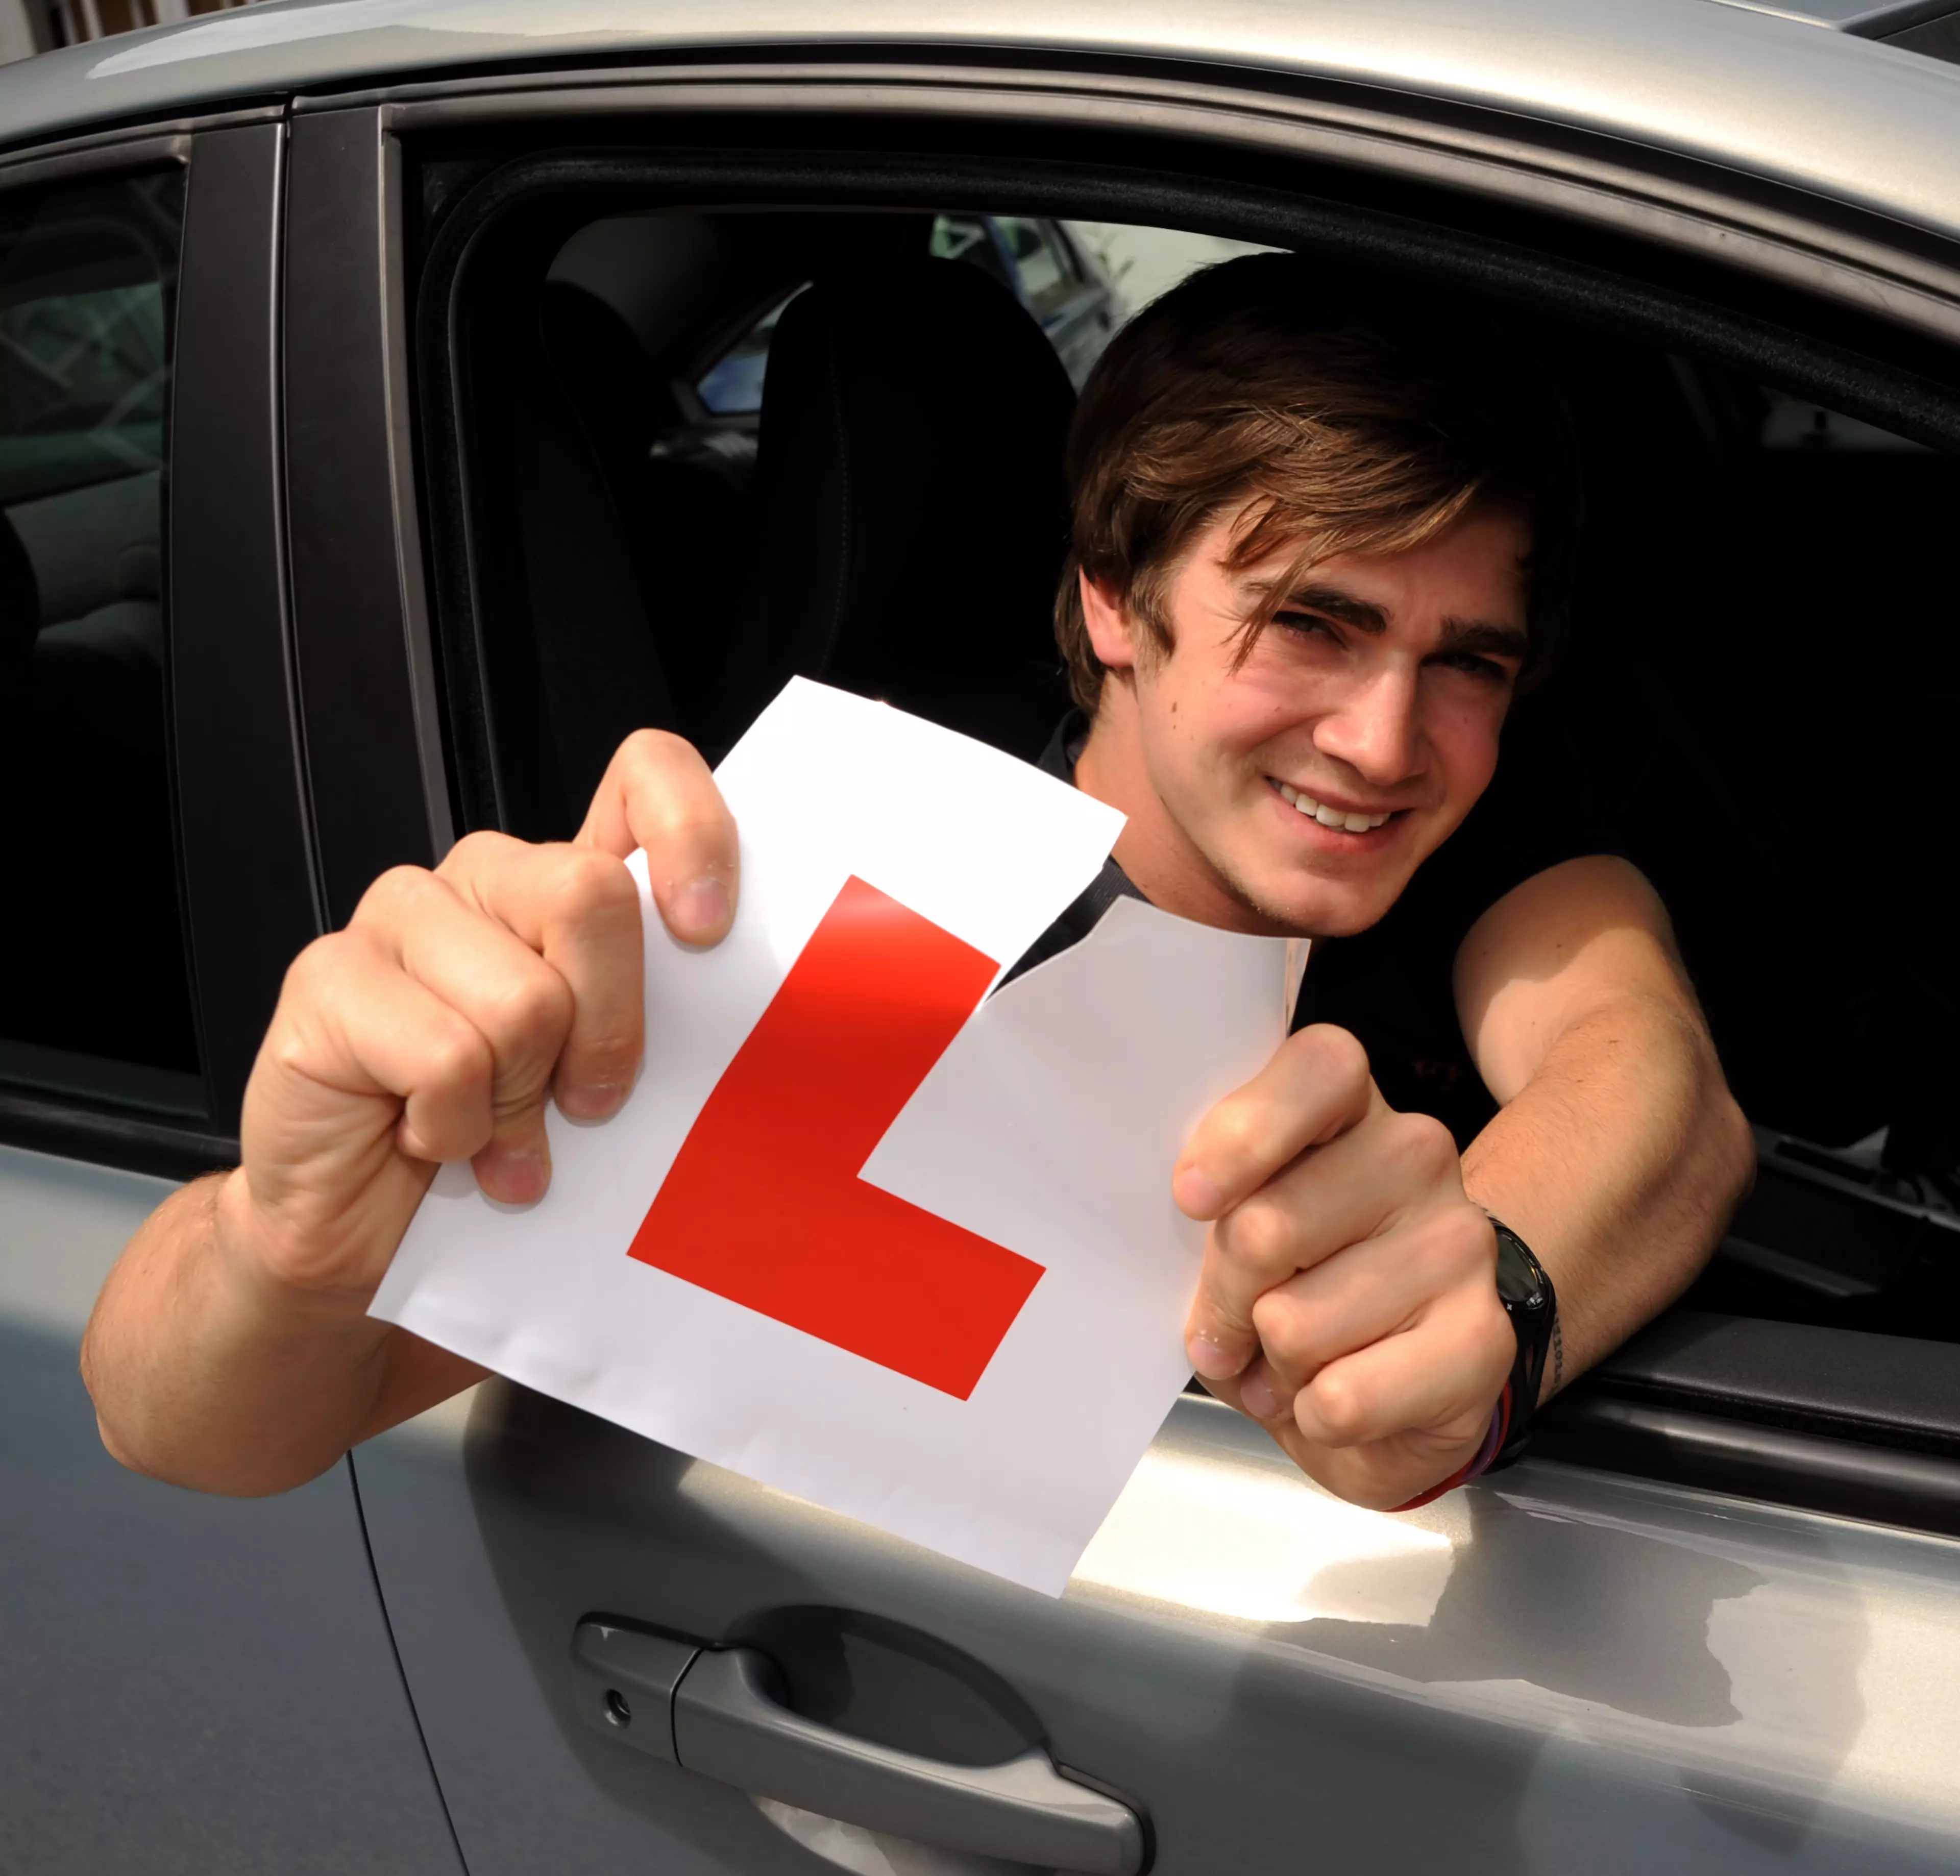 According to reports, young drivers are having to pay out £1,317 on insurance premiums.